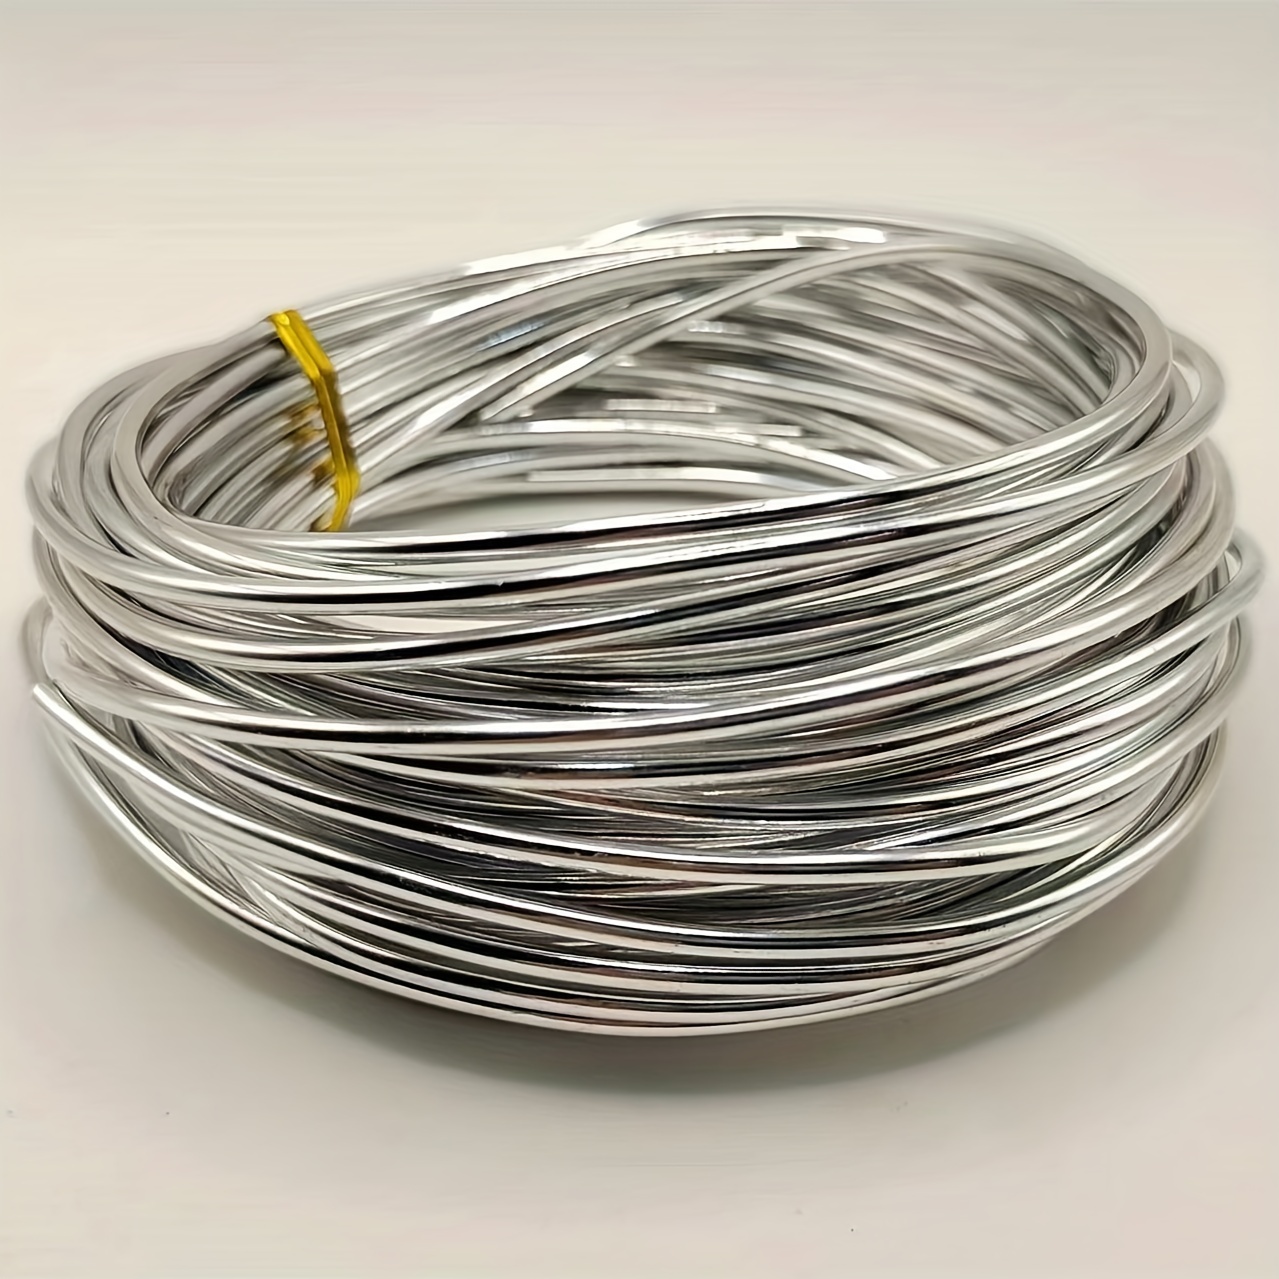 Mr. Pen- Aluminum Wire, 1.5 mm, 32.5 Feet, 1 Roll, Craft Wire, Metal Wire, Armature Wire, Crafting Wire, Bendable Wire, Wire for Crafts, Sculpting CAW99